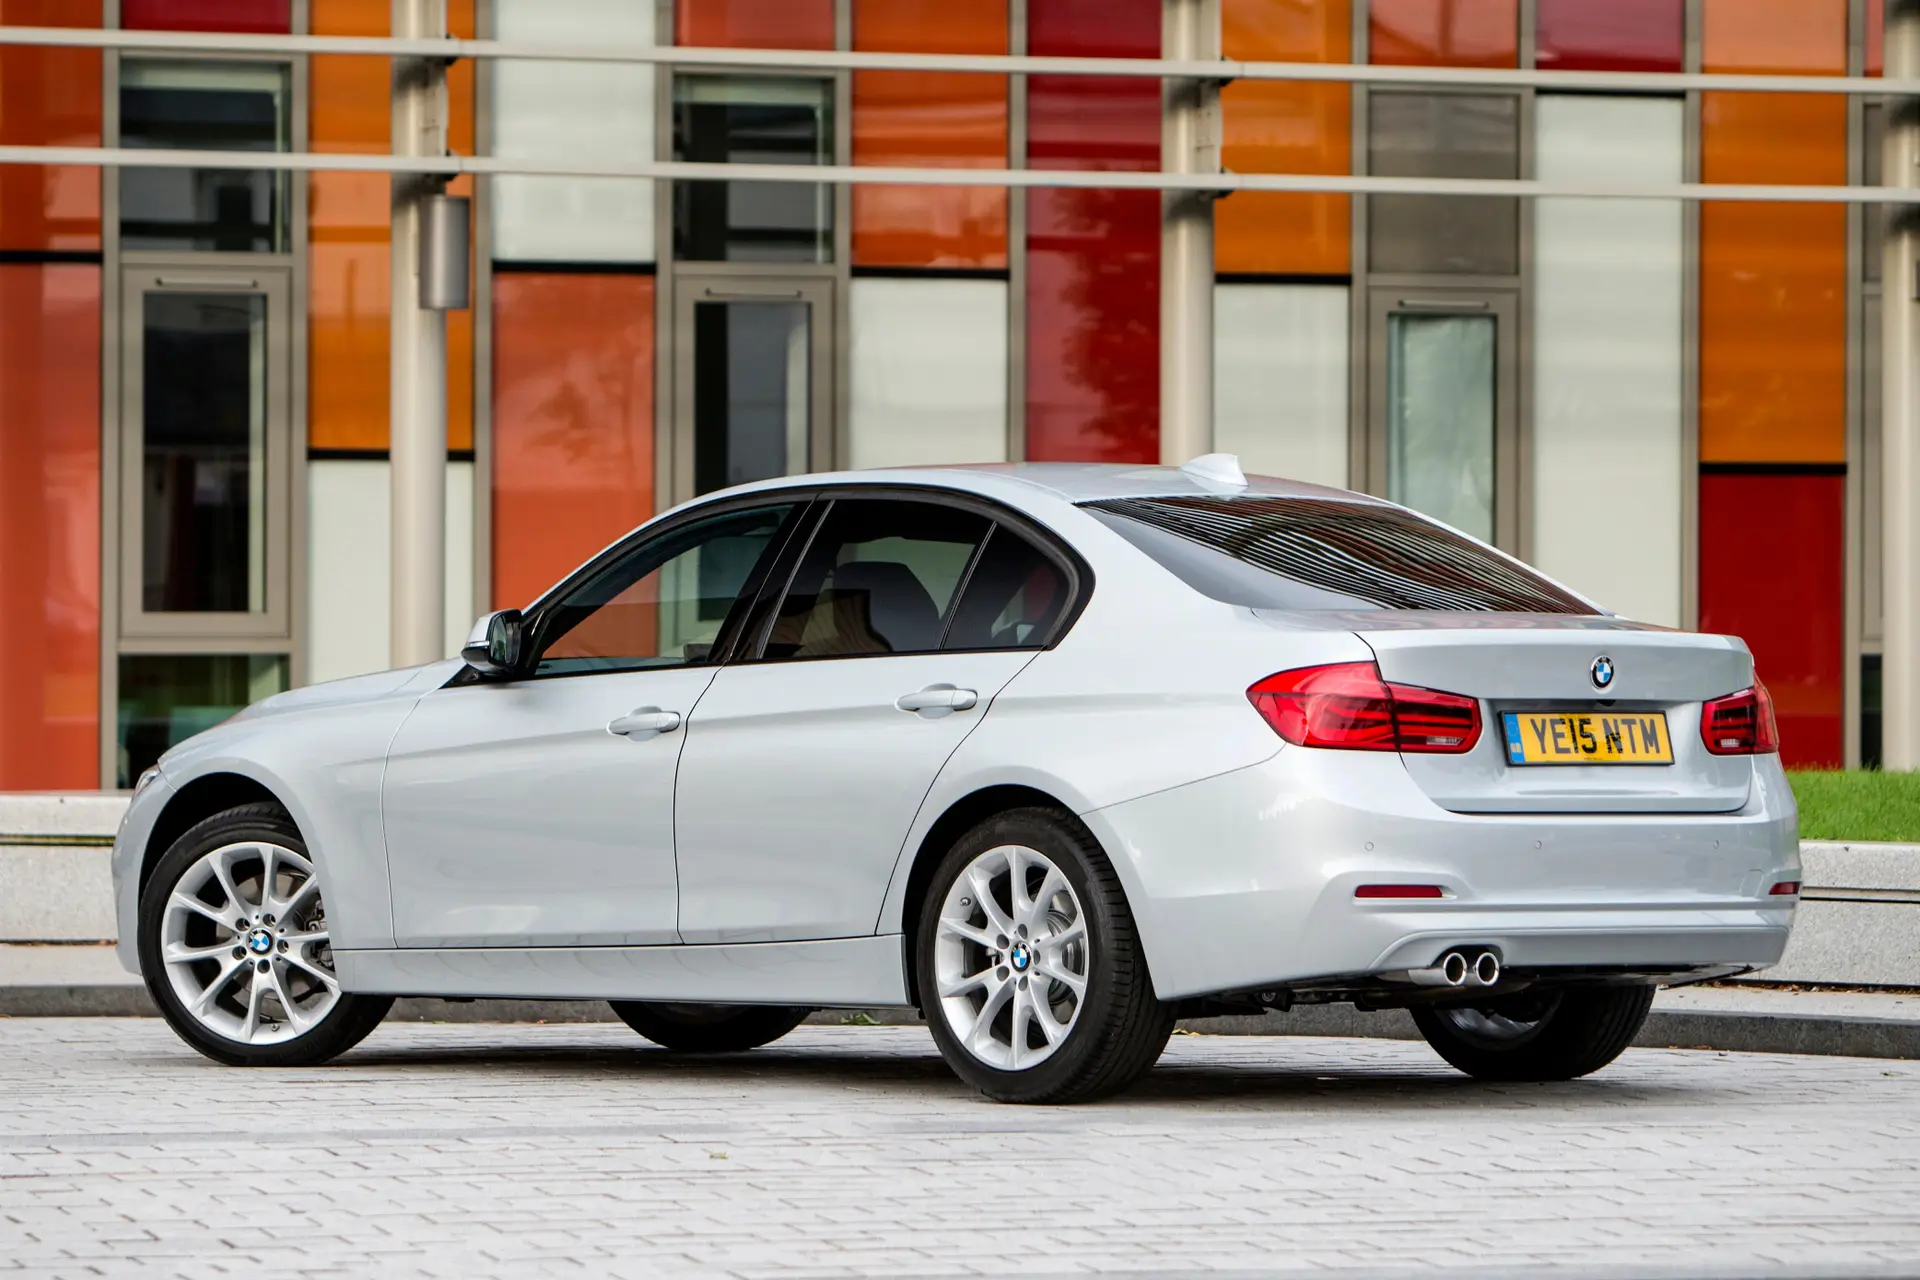 BMW 3 Series (2012-2018) Review: Exterior rear three quarter photo of the BMW 3 Series